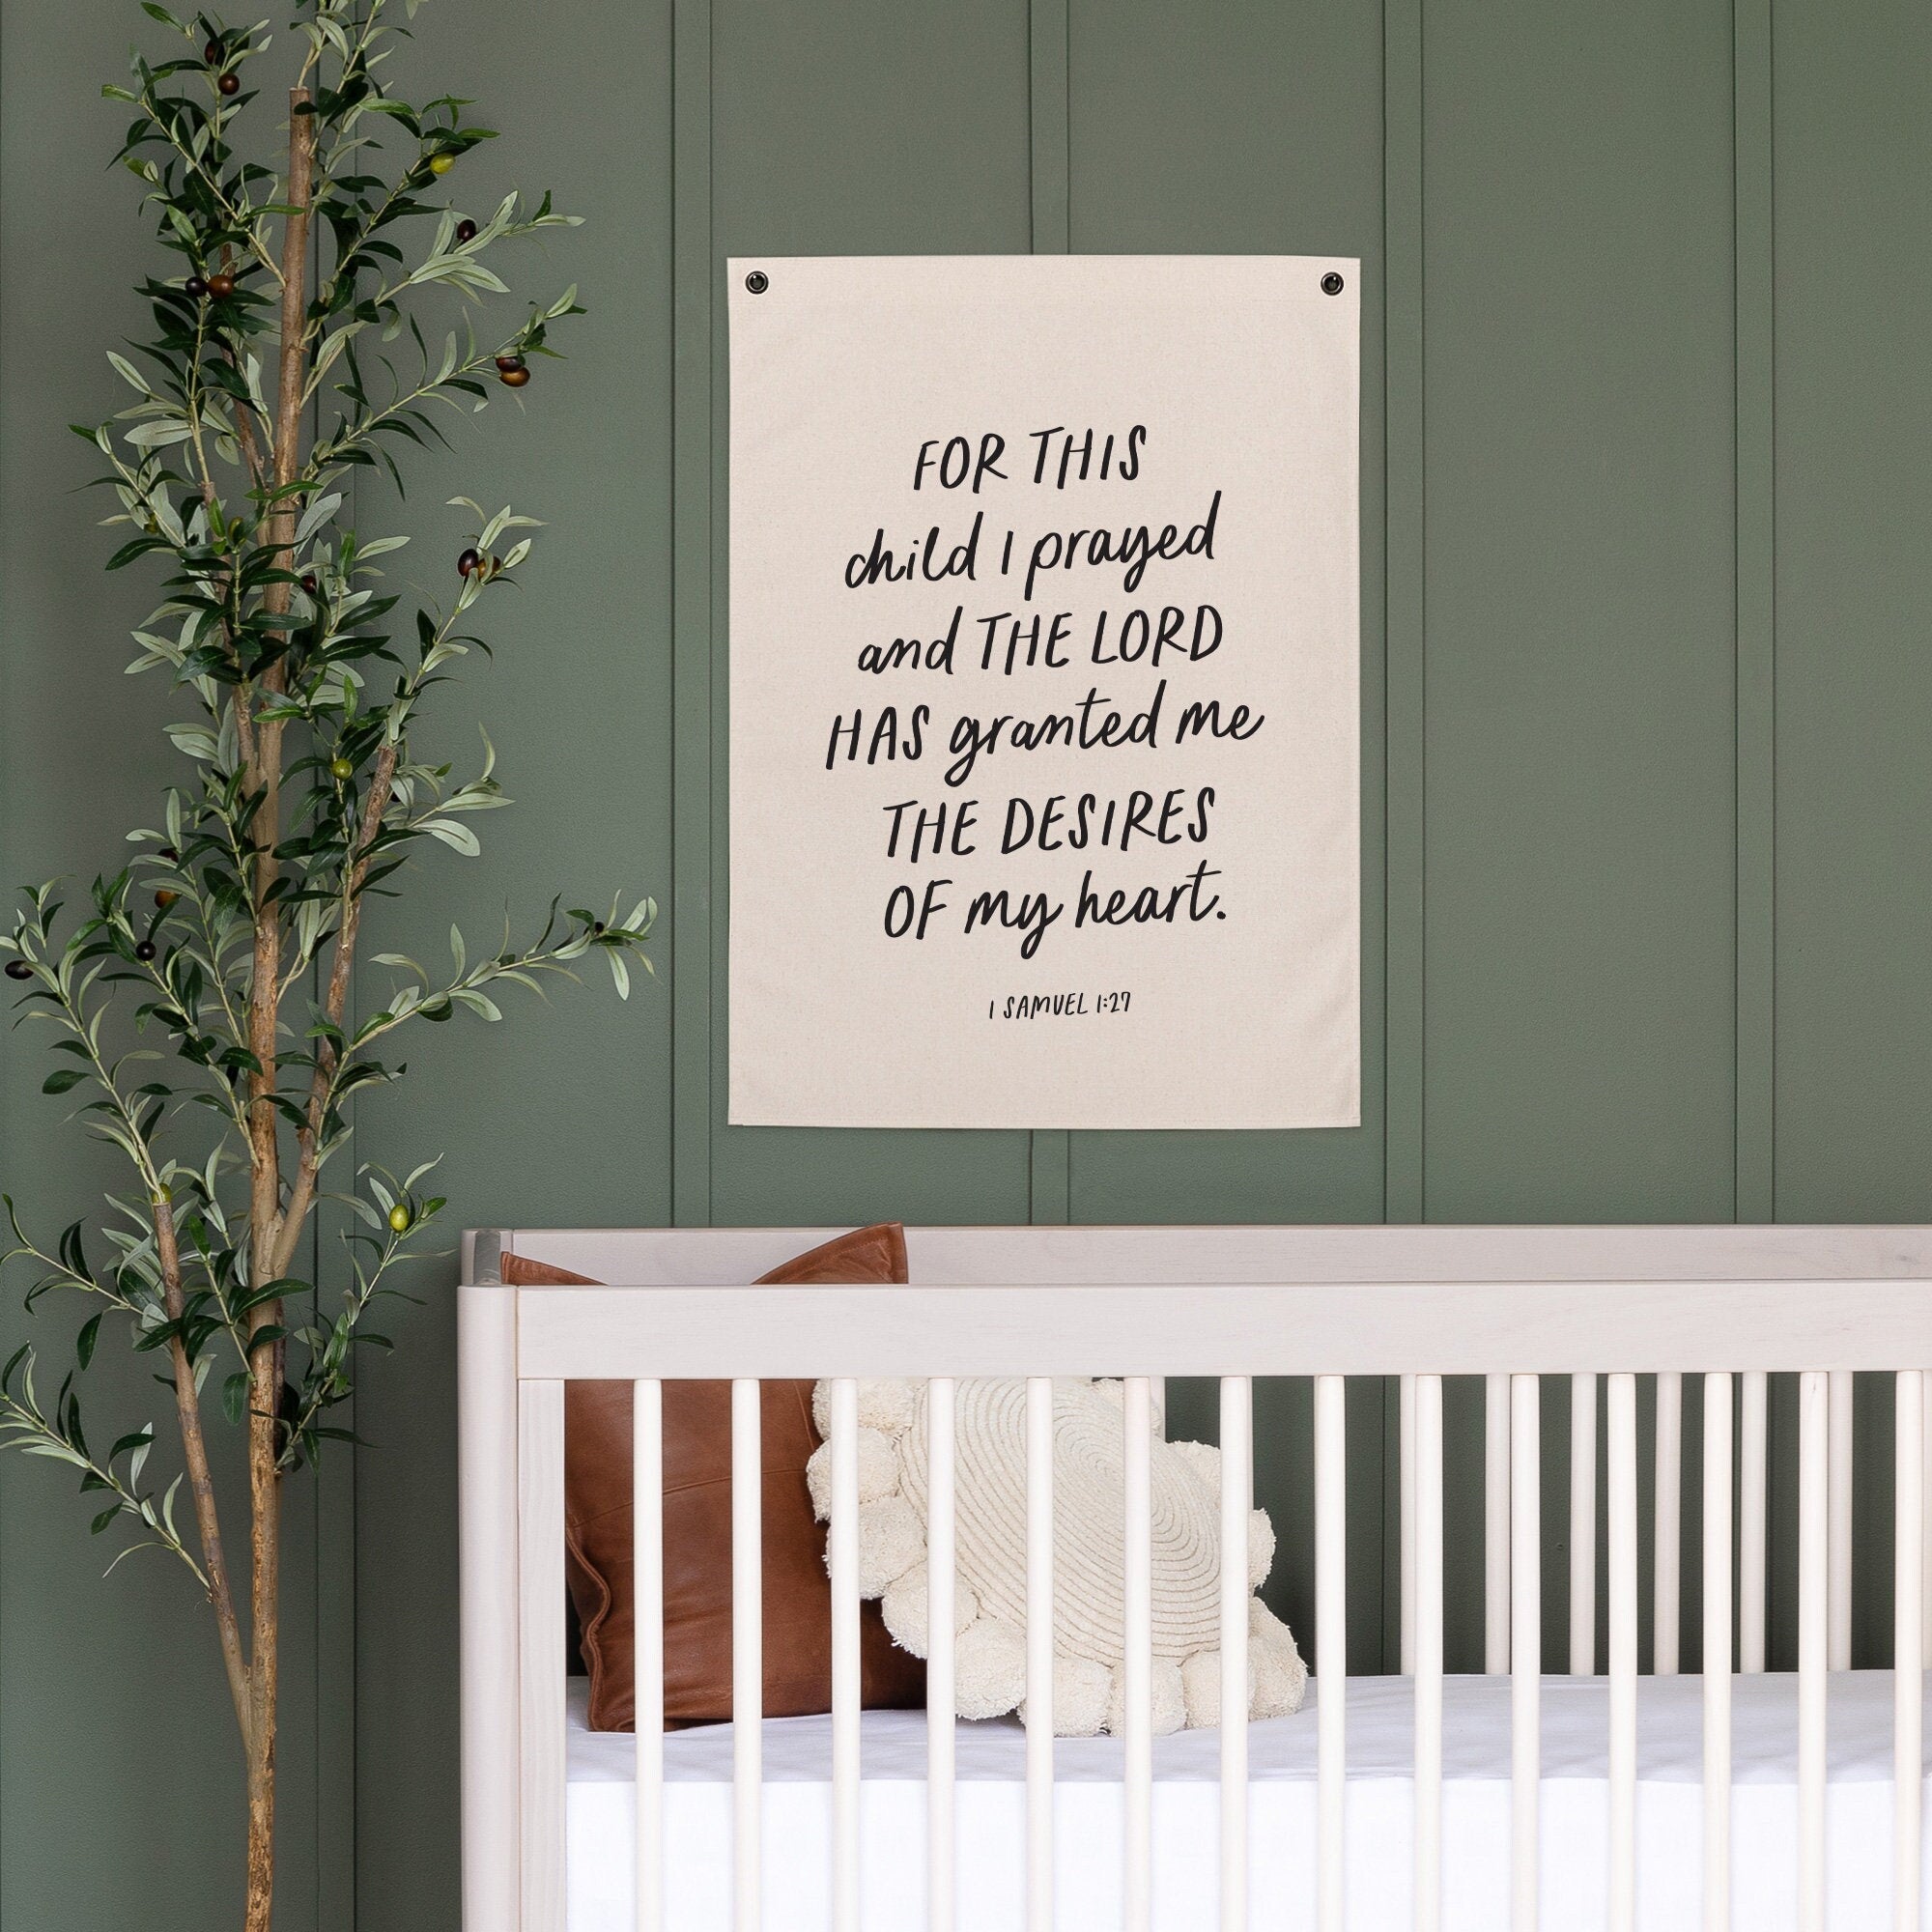 For This Child I Prayed | Canvas Flag | Scripture Nursery Decor | Bible Verse For Nursery | Baby Gift | 1 Samuel 1:27